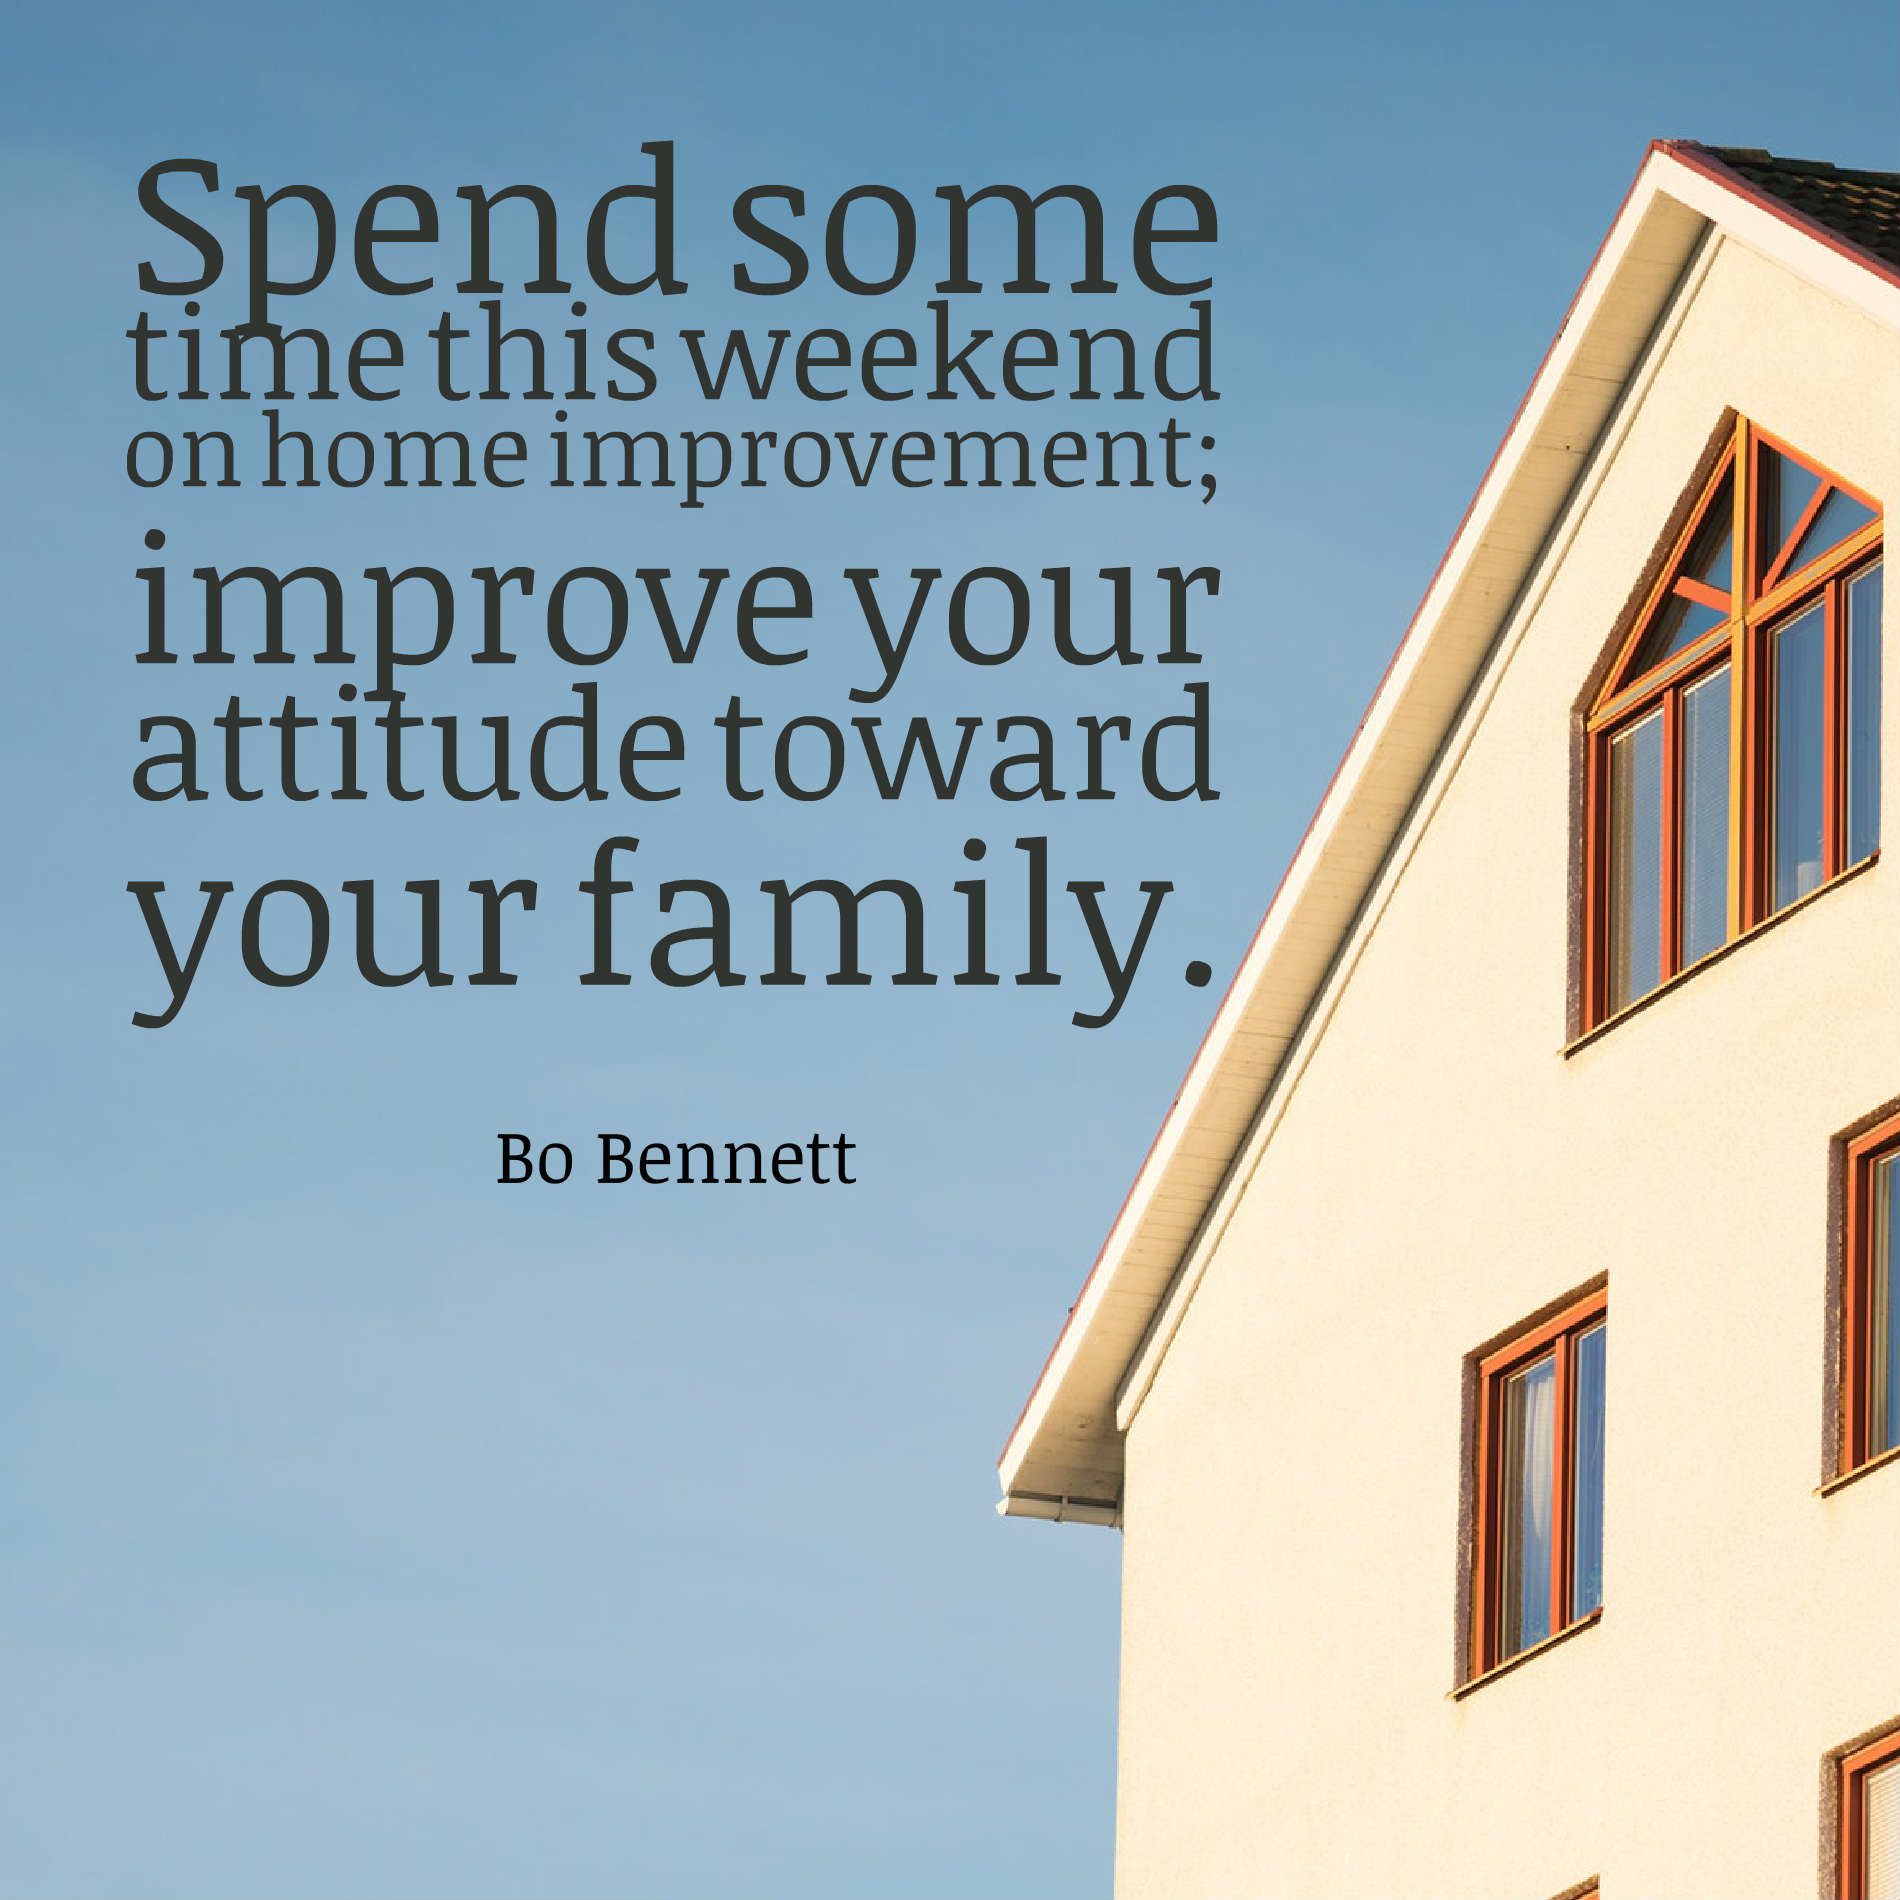 Spend some time this weekend on home improvement improve your attitude toward your family.